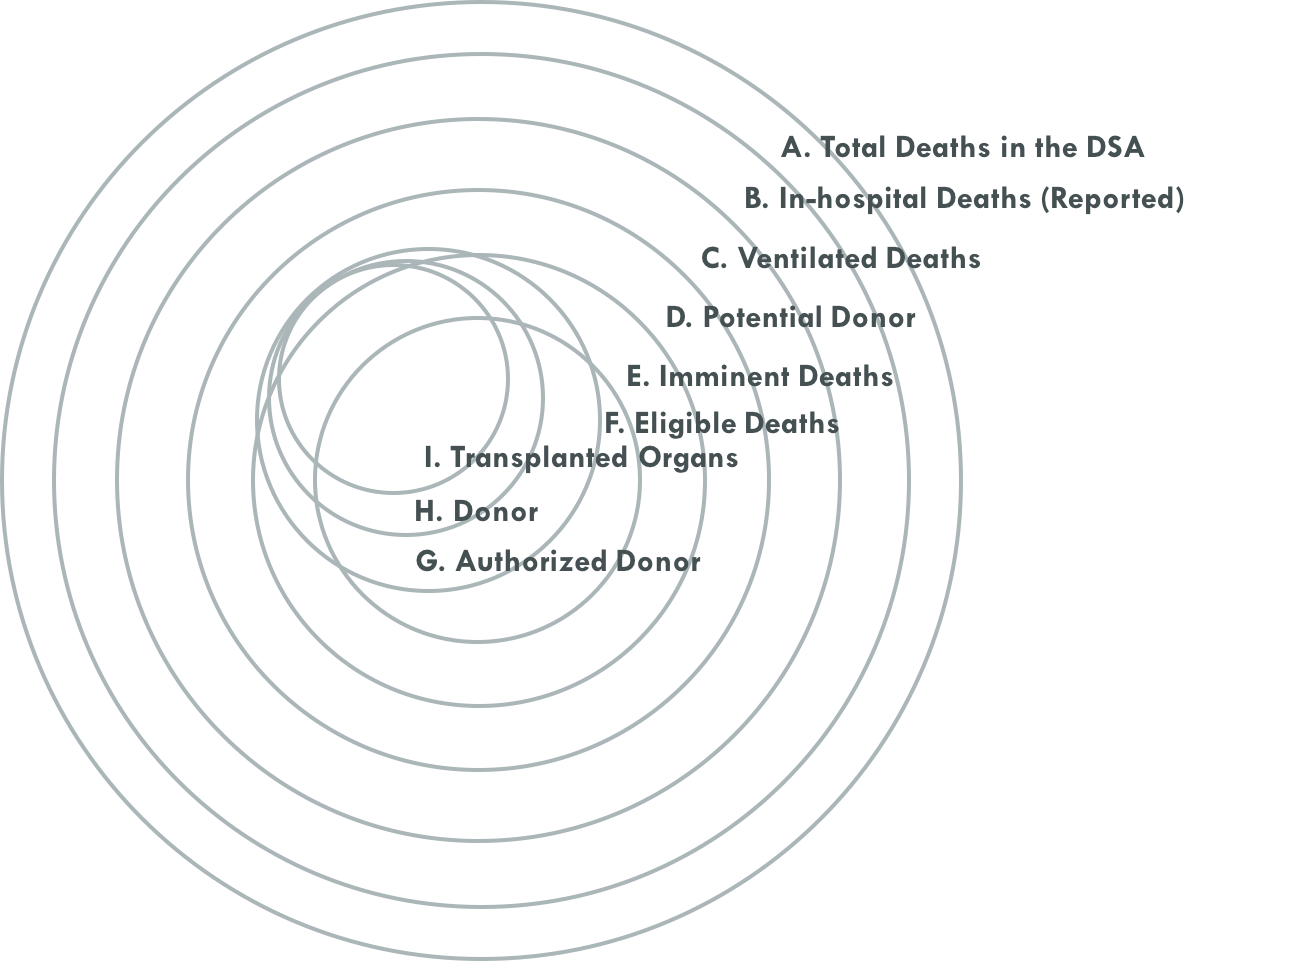 A diagram depicting the potential donor conversion process using a series of concentric circles.